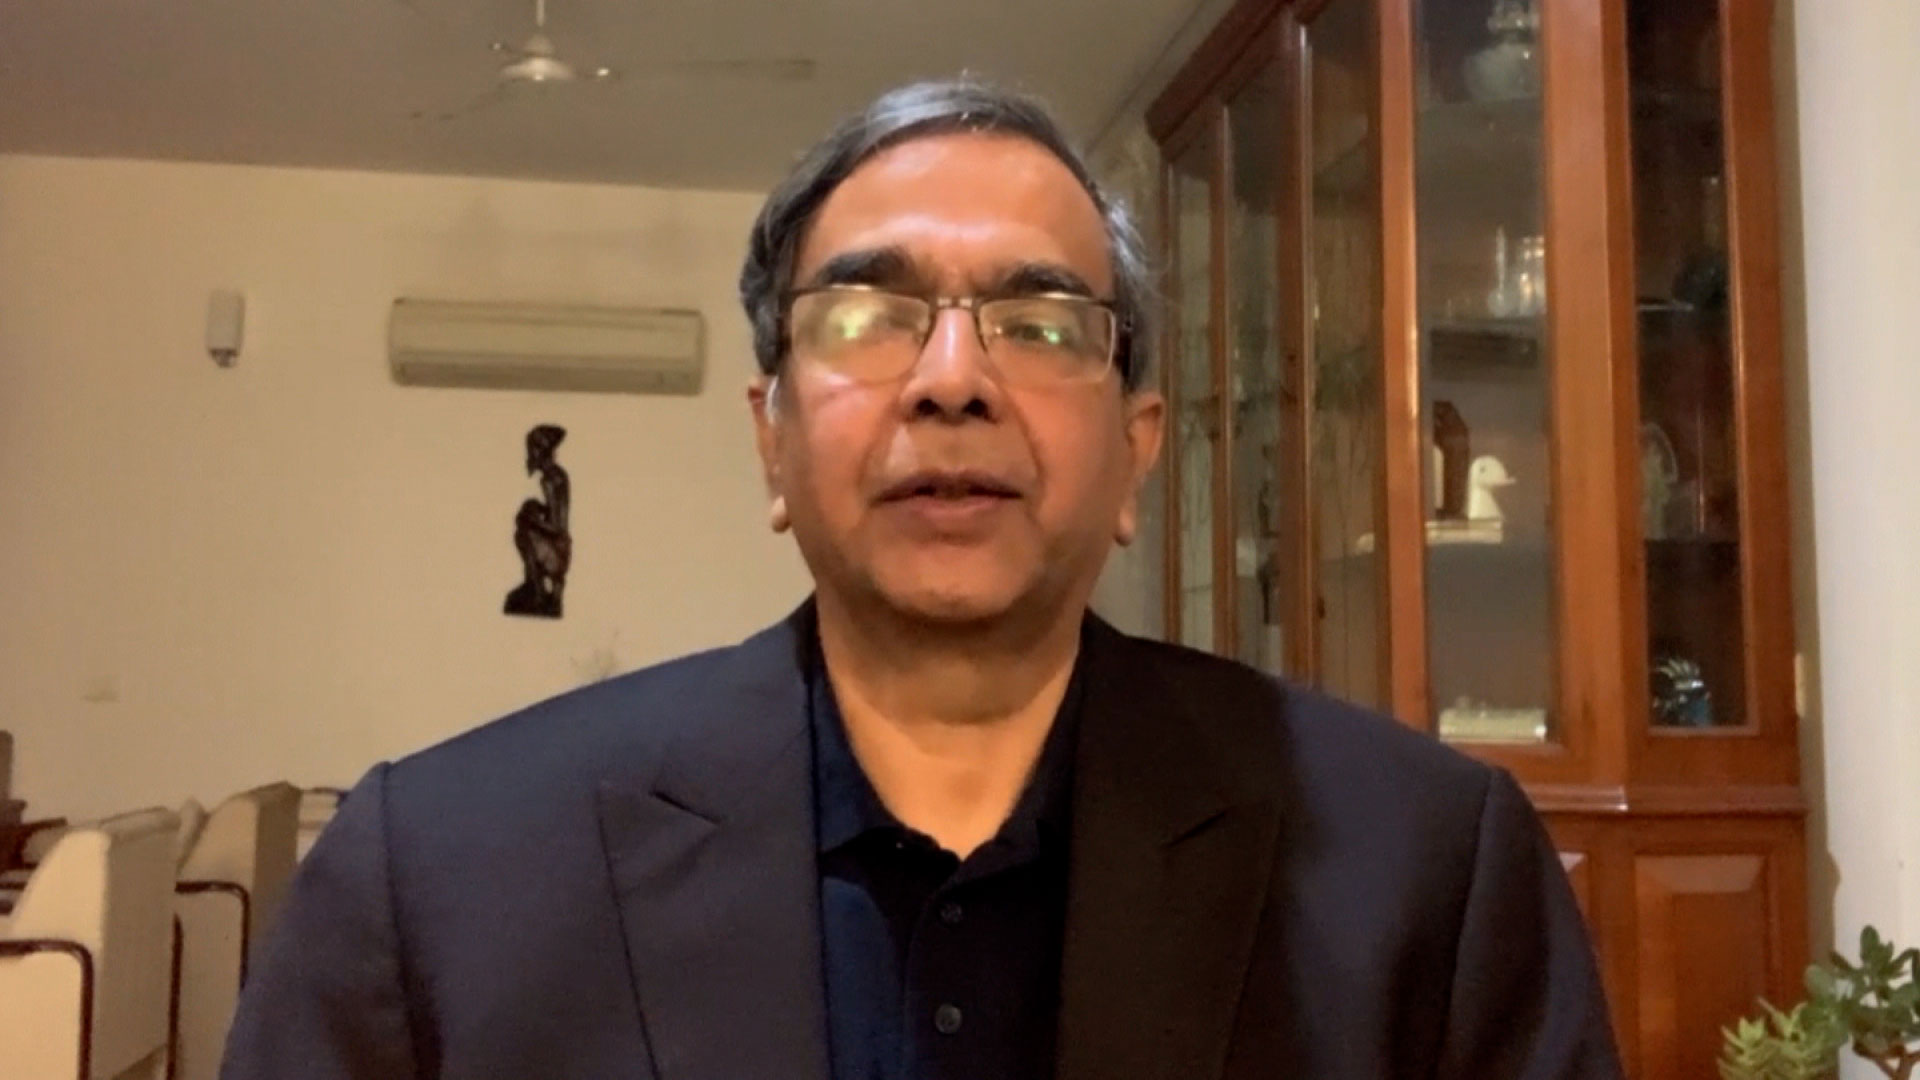 Dr. K. Srinath Reddy, president of the Public Health Foundation of India, on April 27.